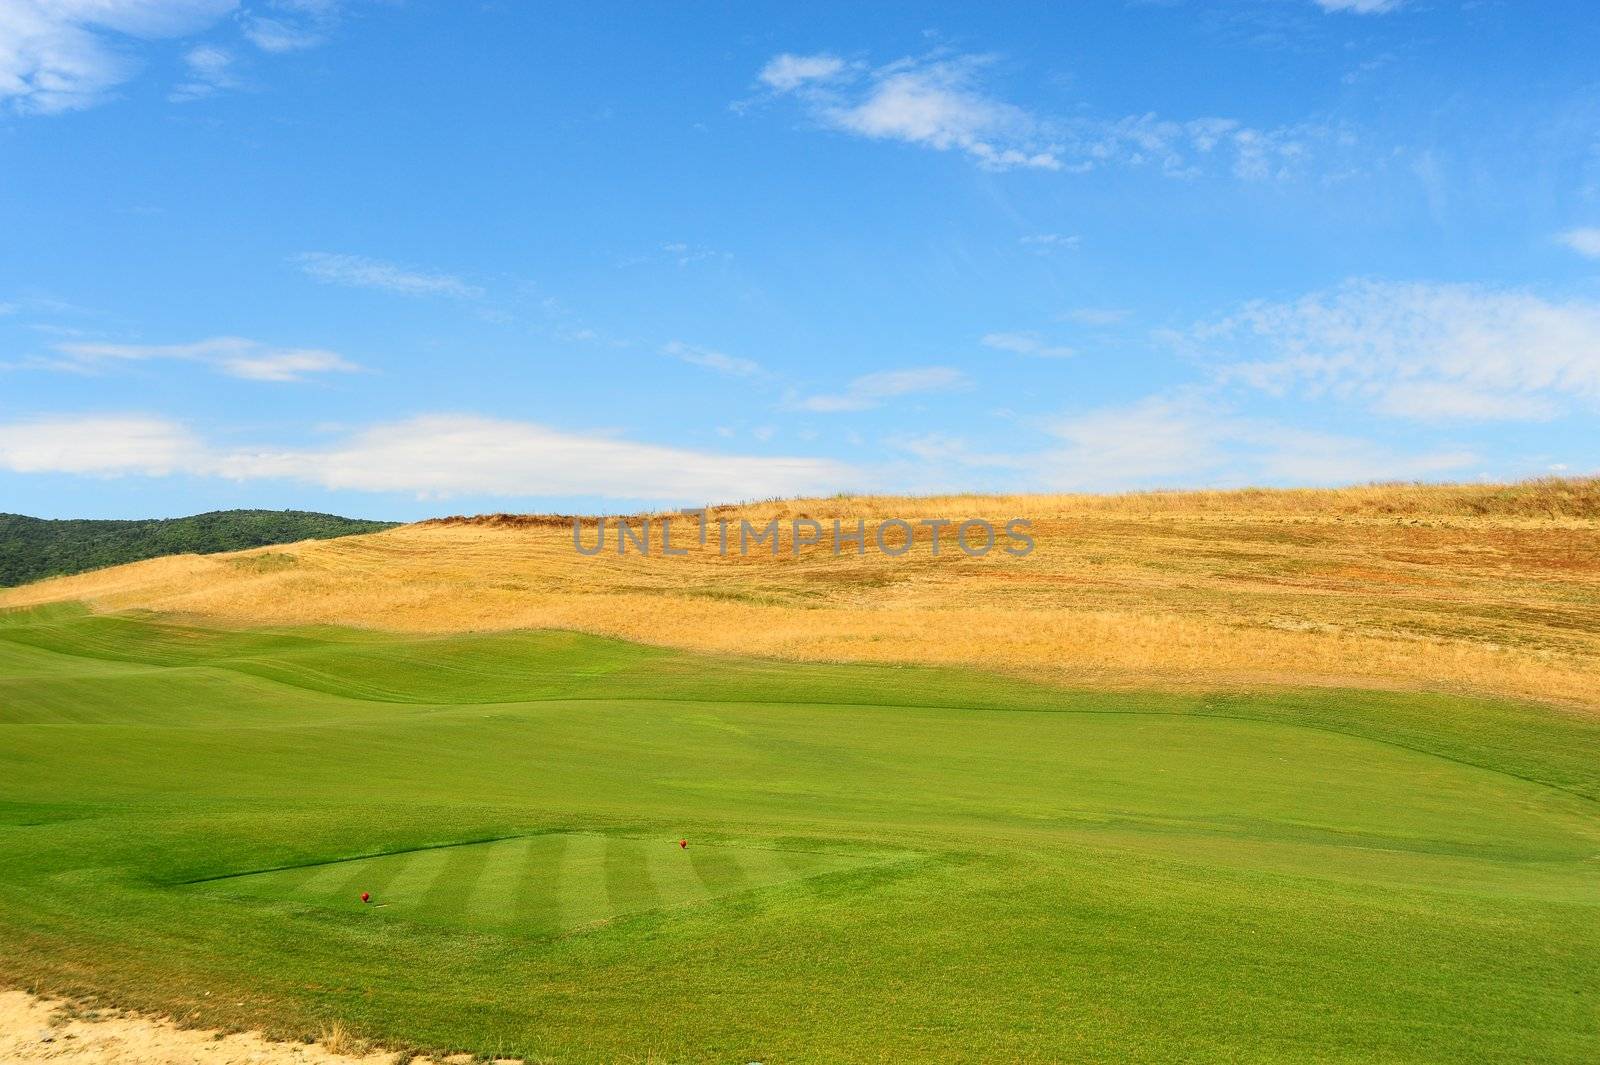 Construction Area Of The Golf Course In Toscana, Italy